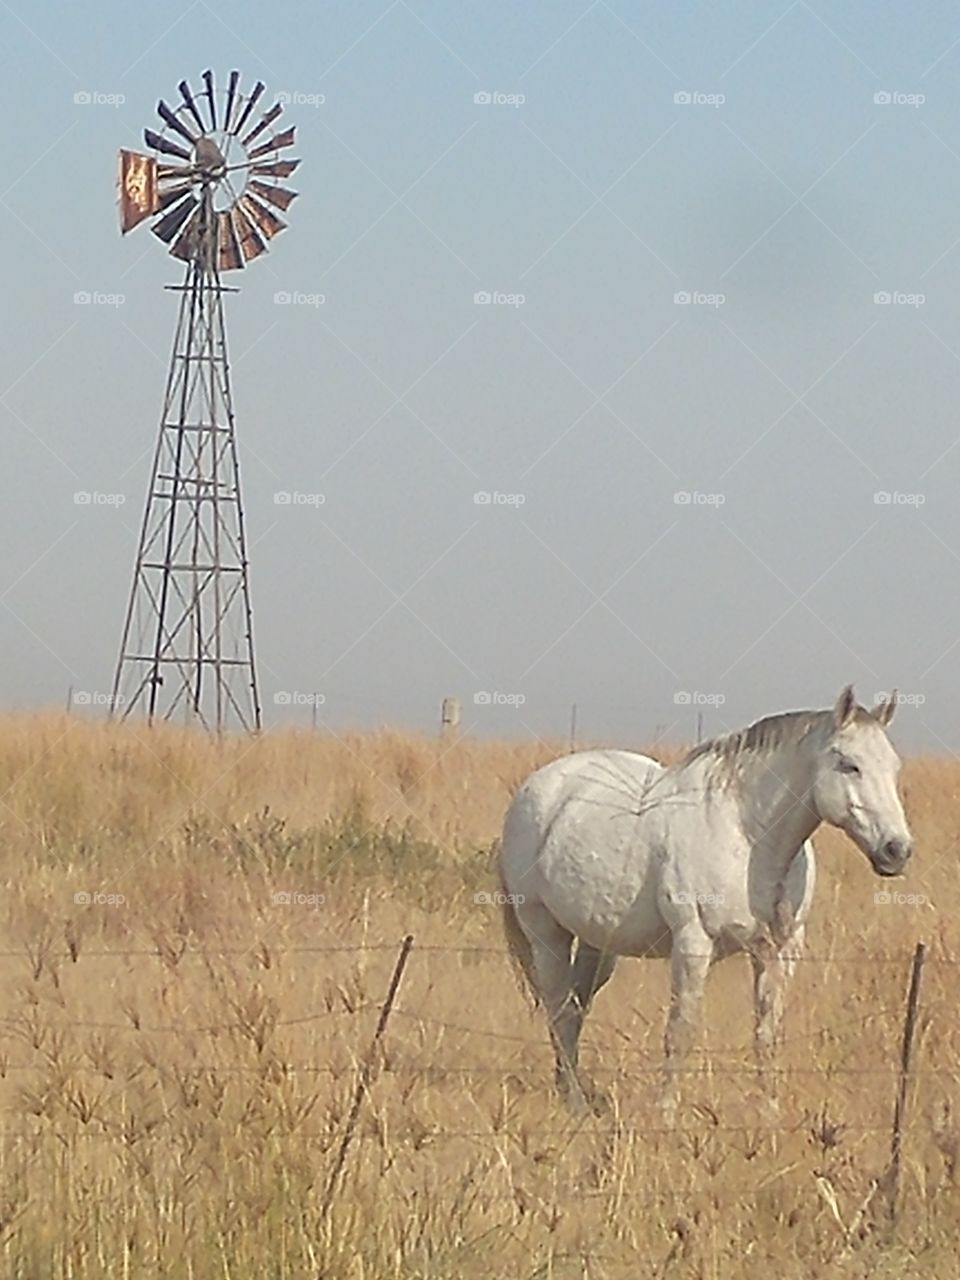 Inquisitive white horse ambles closer hoping for a tidbit against a dry winter grass background accentuated by the secondary windmill focal point.